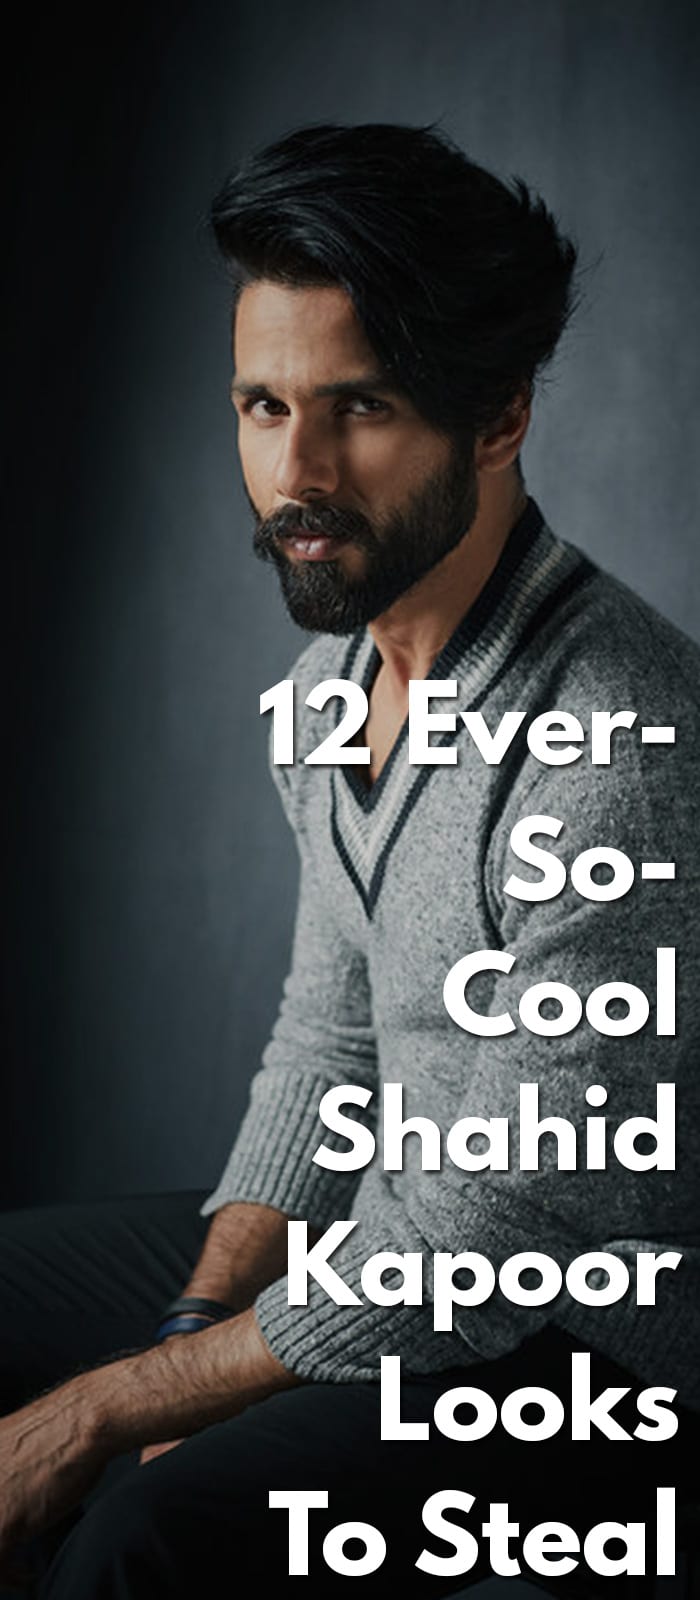 12 Ever-So-Cool Shahid Kapoor Looks To Steal!